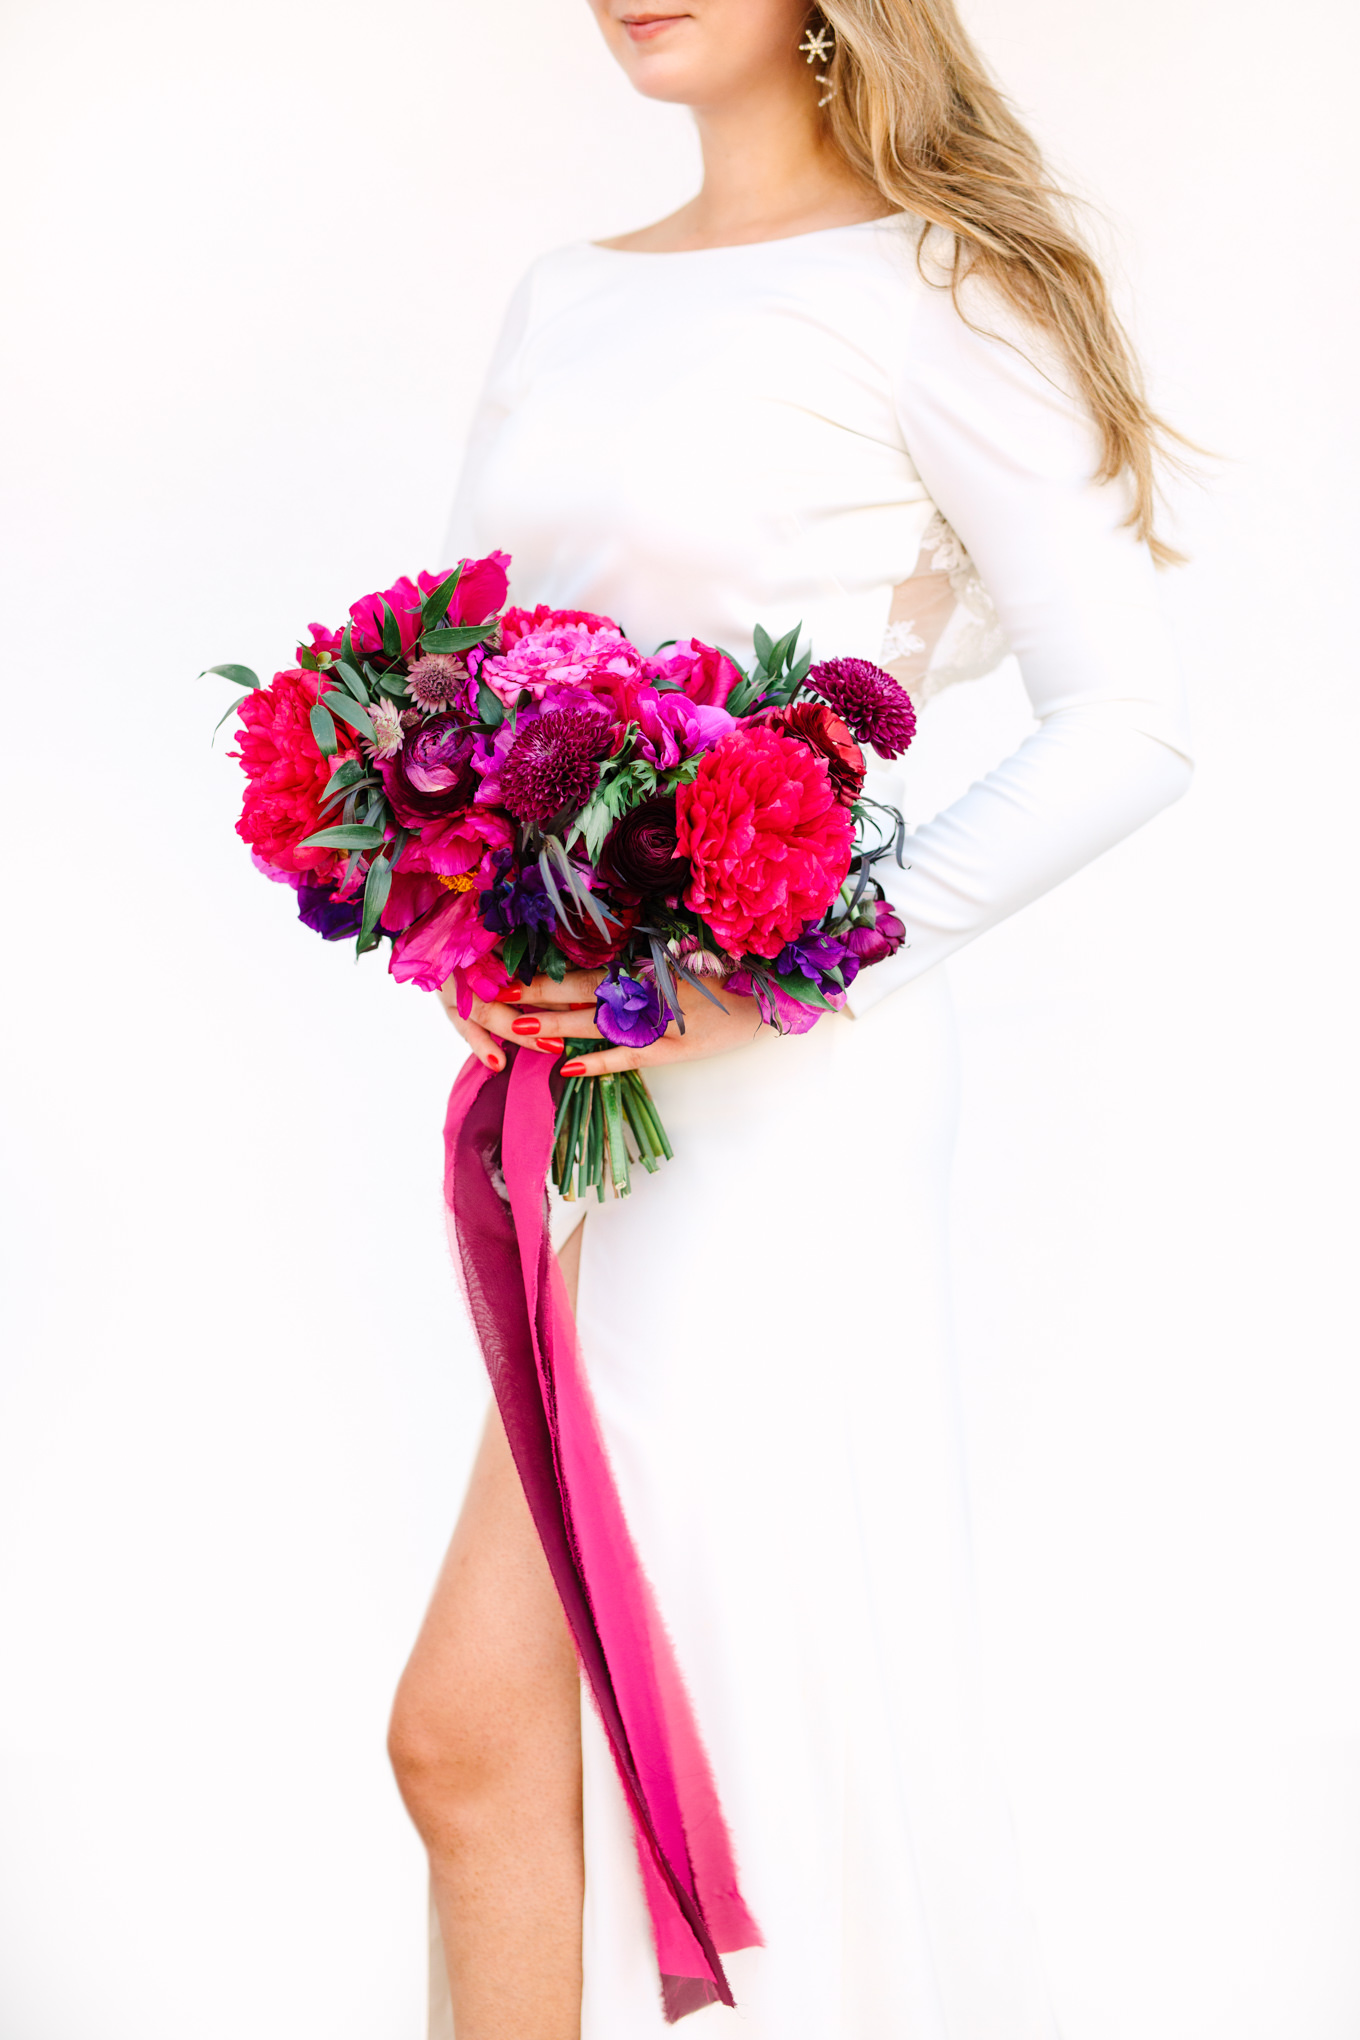 Jewel tone bridal bouquet by Shindig Chic | Colorful jewel tone Palm Springs elopement | Fresh and colorful photography for fun-loving couples in Southern California | #colorfulelopement #palmspringselopement #elopementphotography #palmspringswedding Source: Mary Costa Photography | Los Angeles